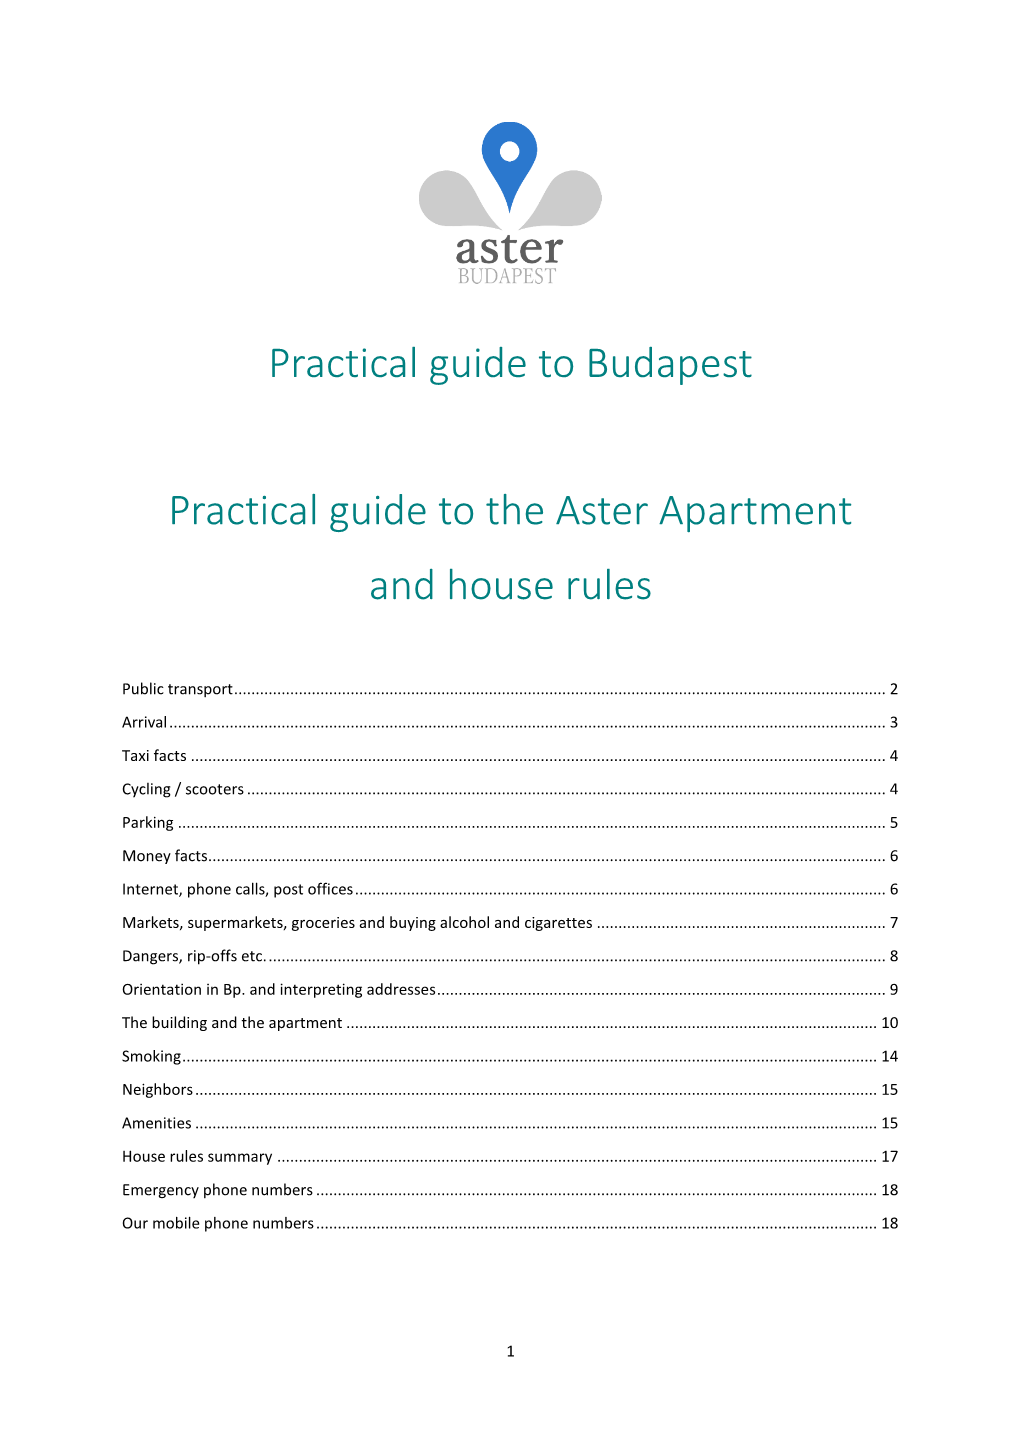 Practical Guide to Budapest Practical Guide to the Aster Apartment and House Rules